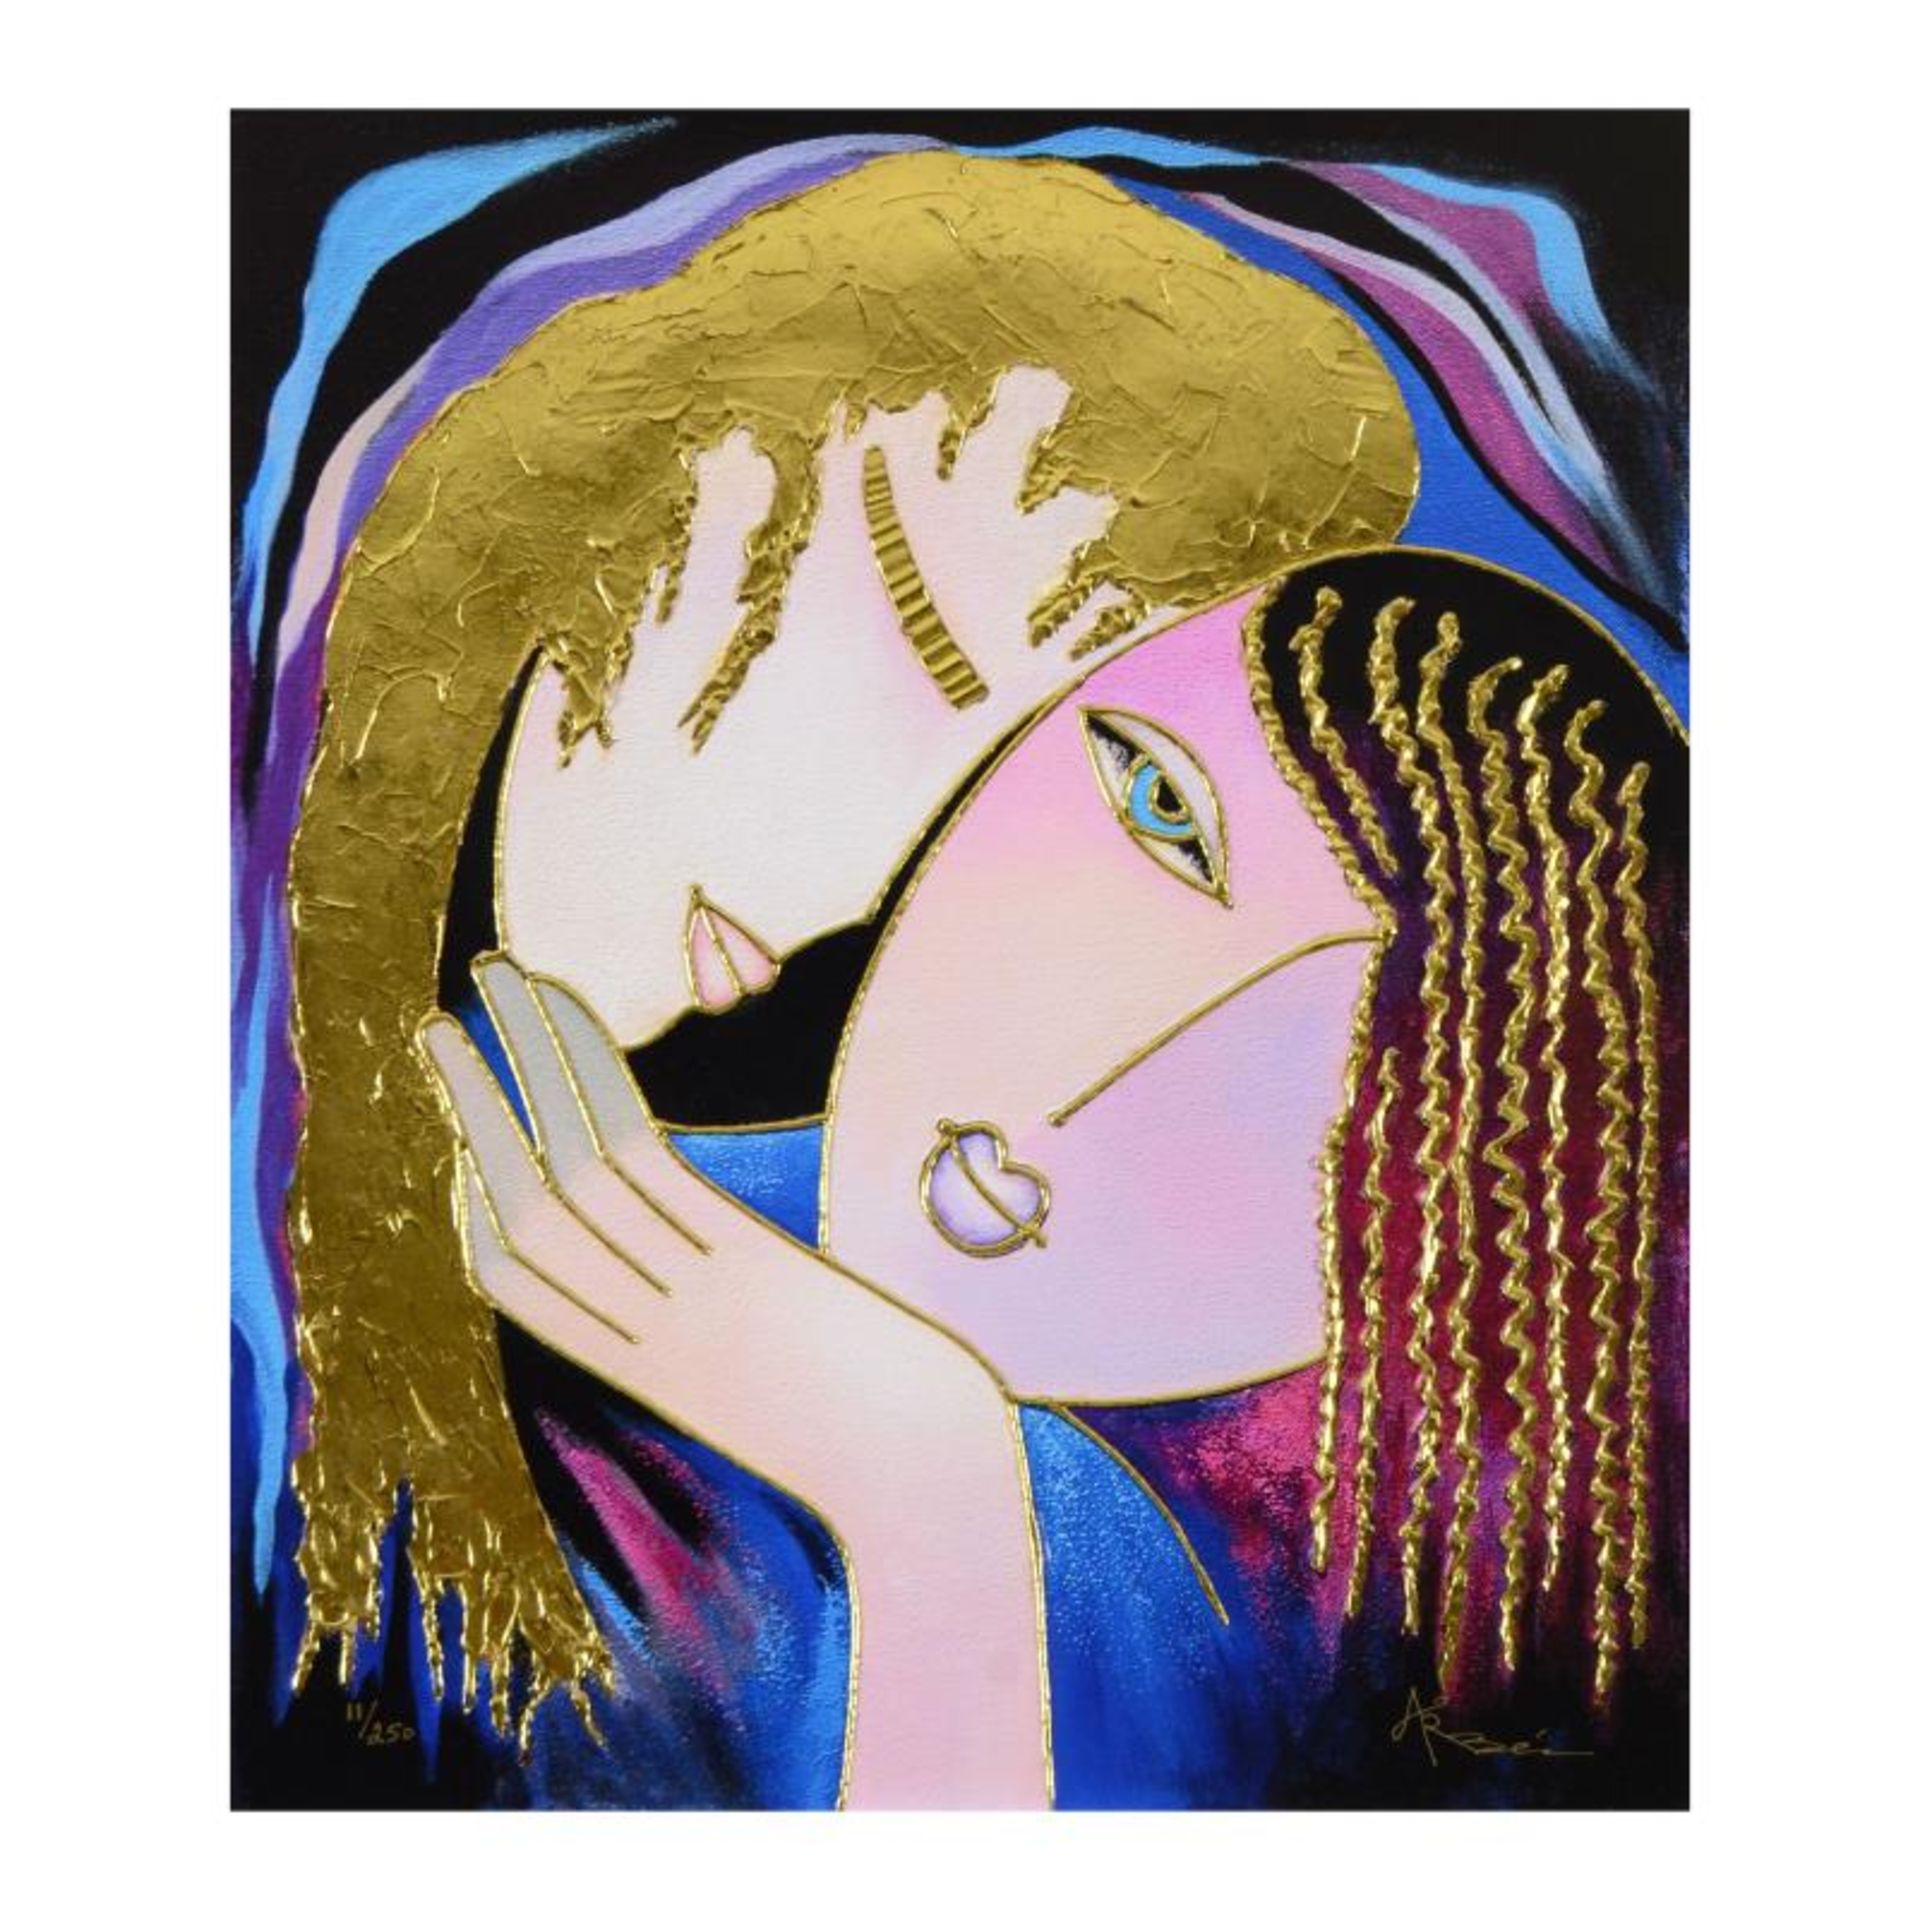 Arbe, "Little Sister" Limited Edition on Canvas with Gold Embellishing, Numbered